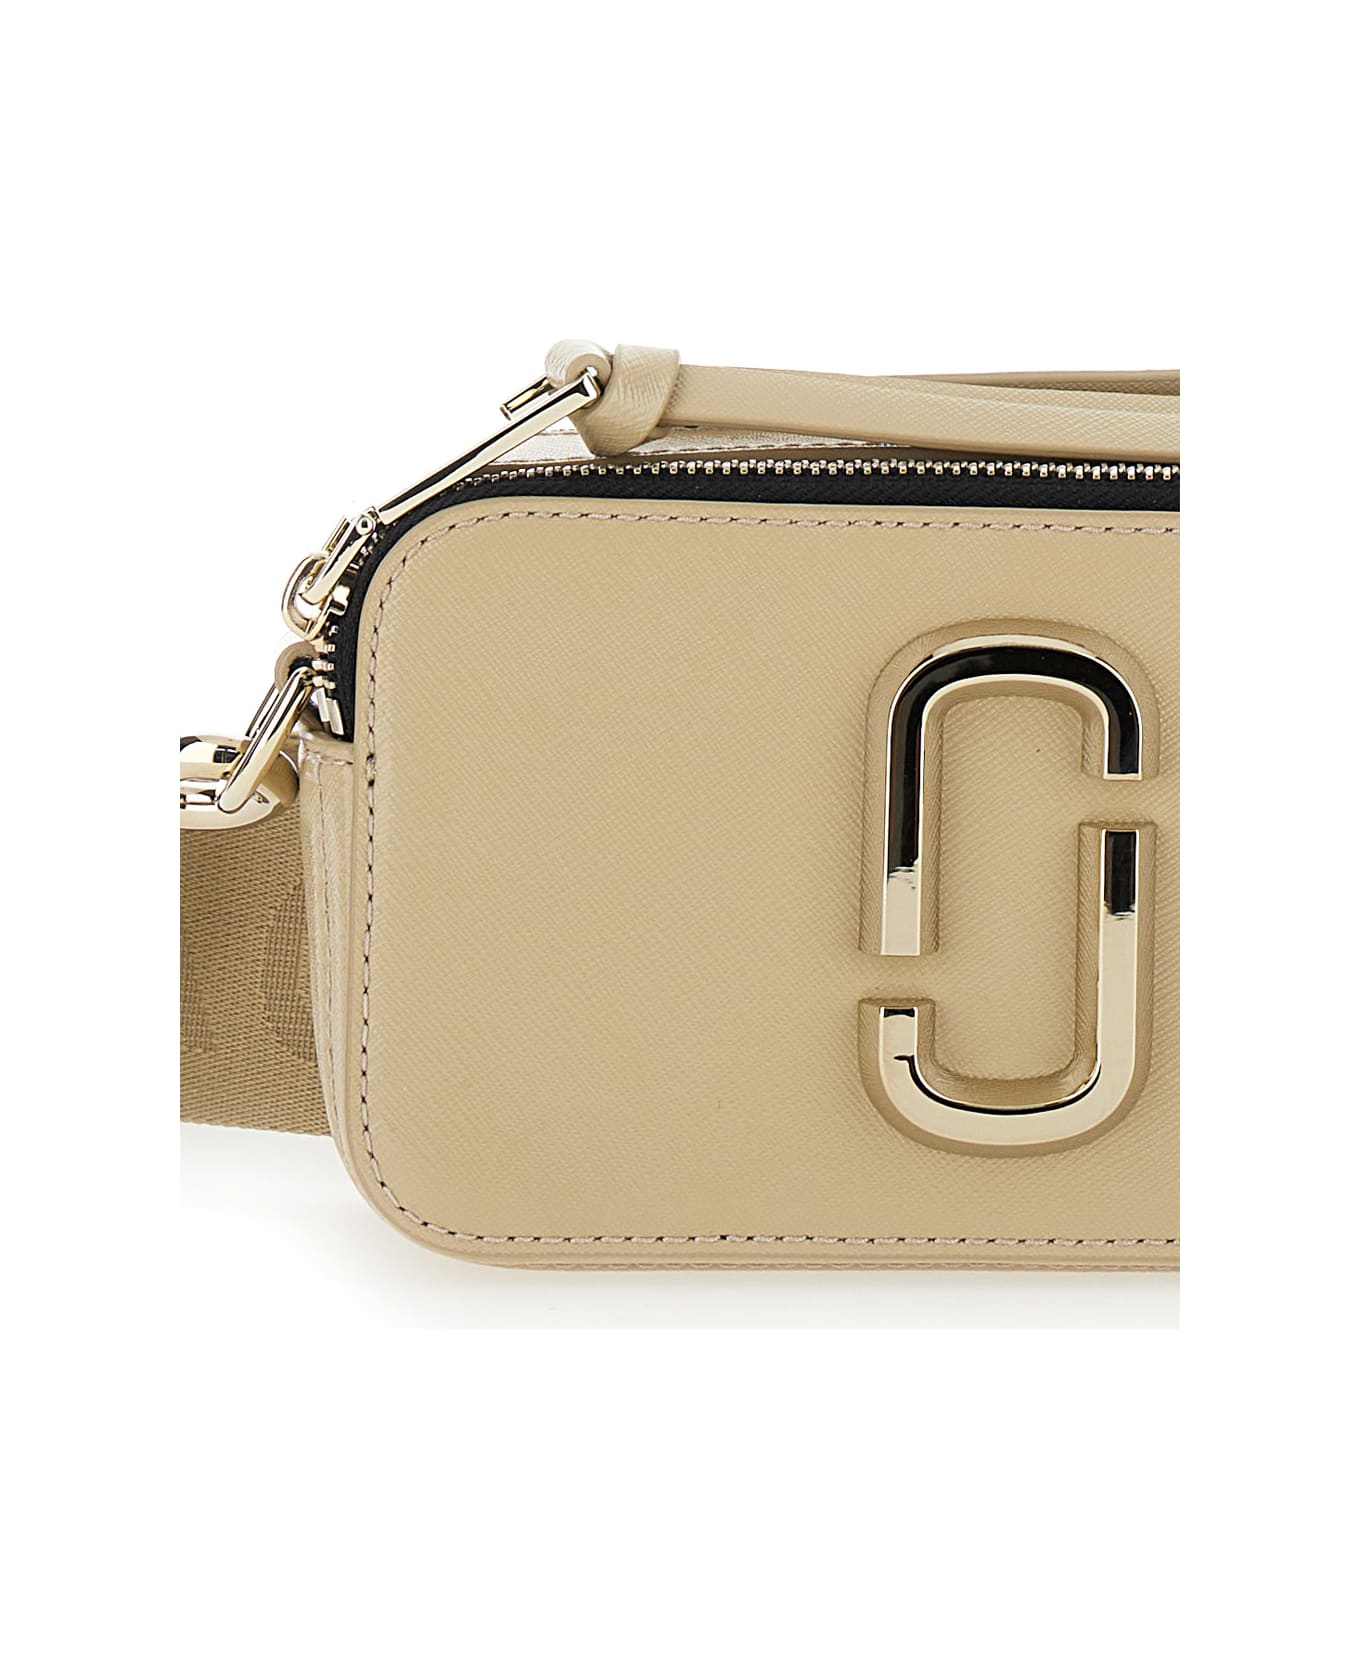 Marc Jacobs 'the Snapshot' Beige Shoulder Bag With Metal Logo At The Front In Leather Woman - Beige ショルダーバッグ